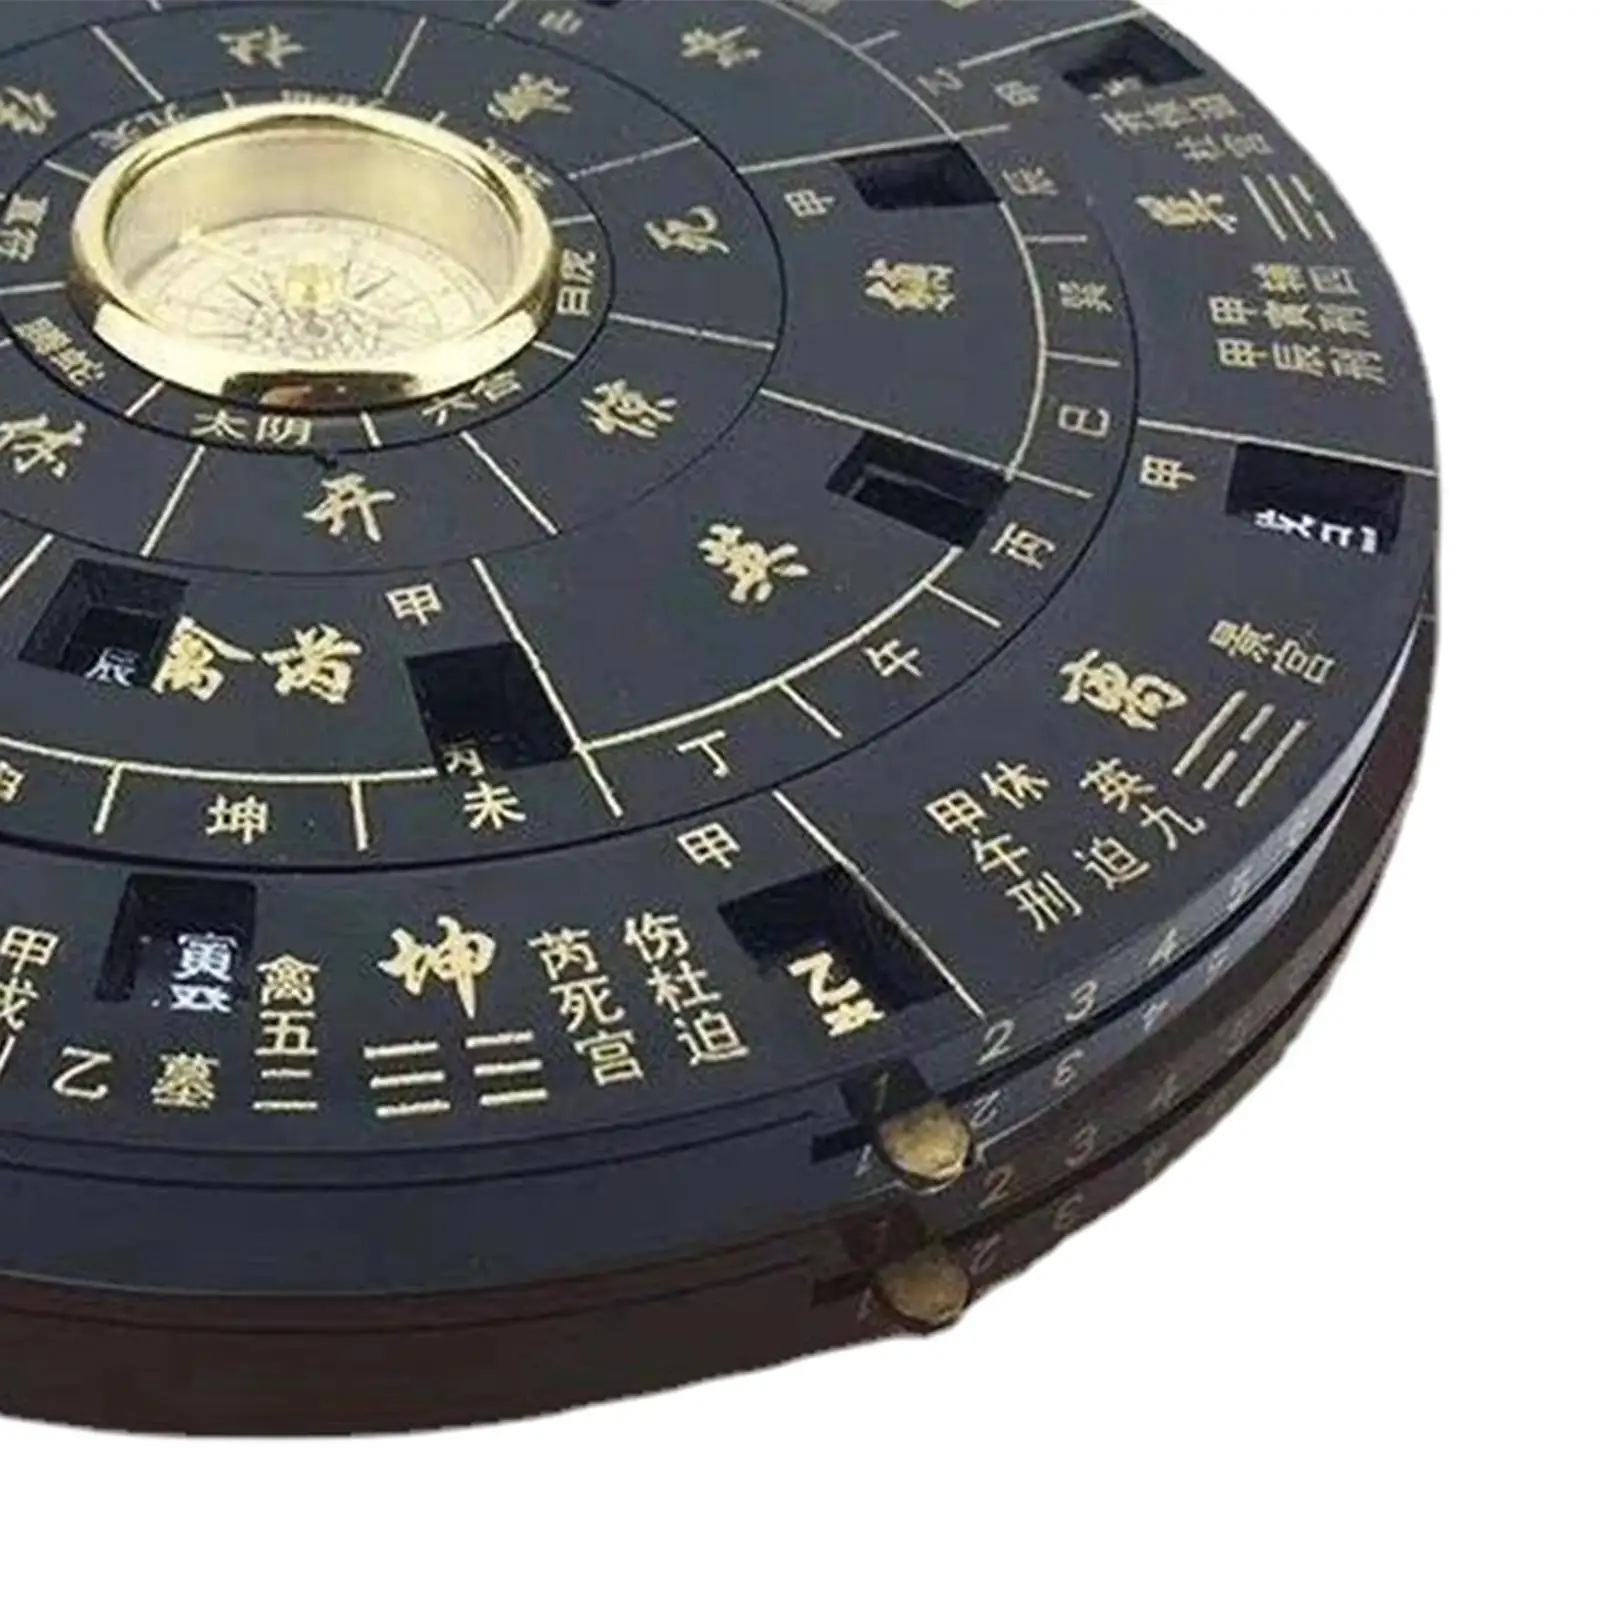 Feng Shui Luo Pan Ancient Chinese Compass Resin Round Durable Small Portable High Precision Dragon Phoenix Vintage Bagua Tool